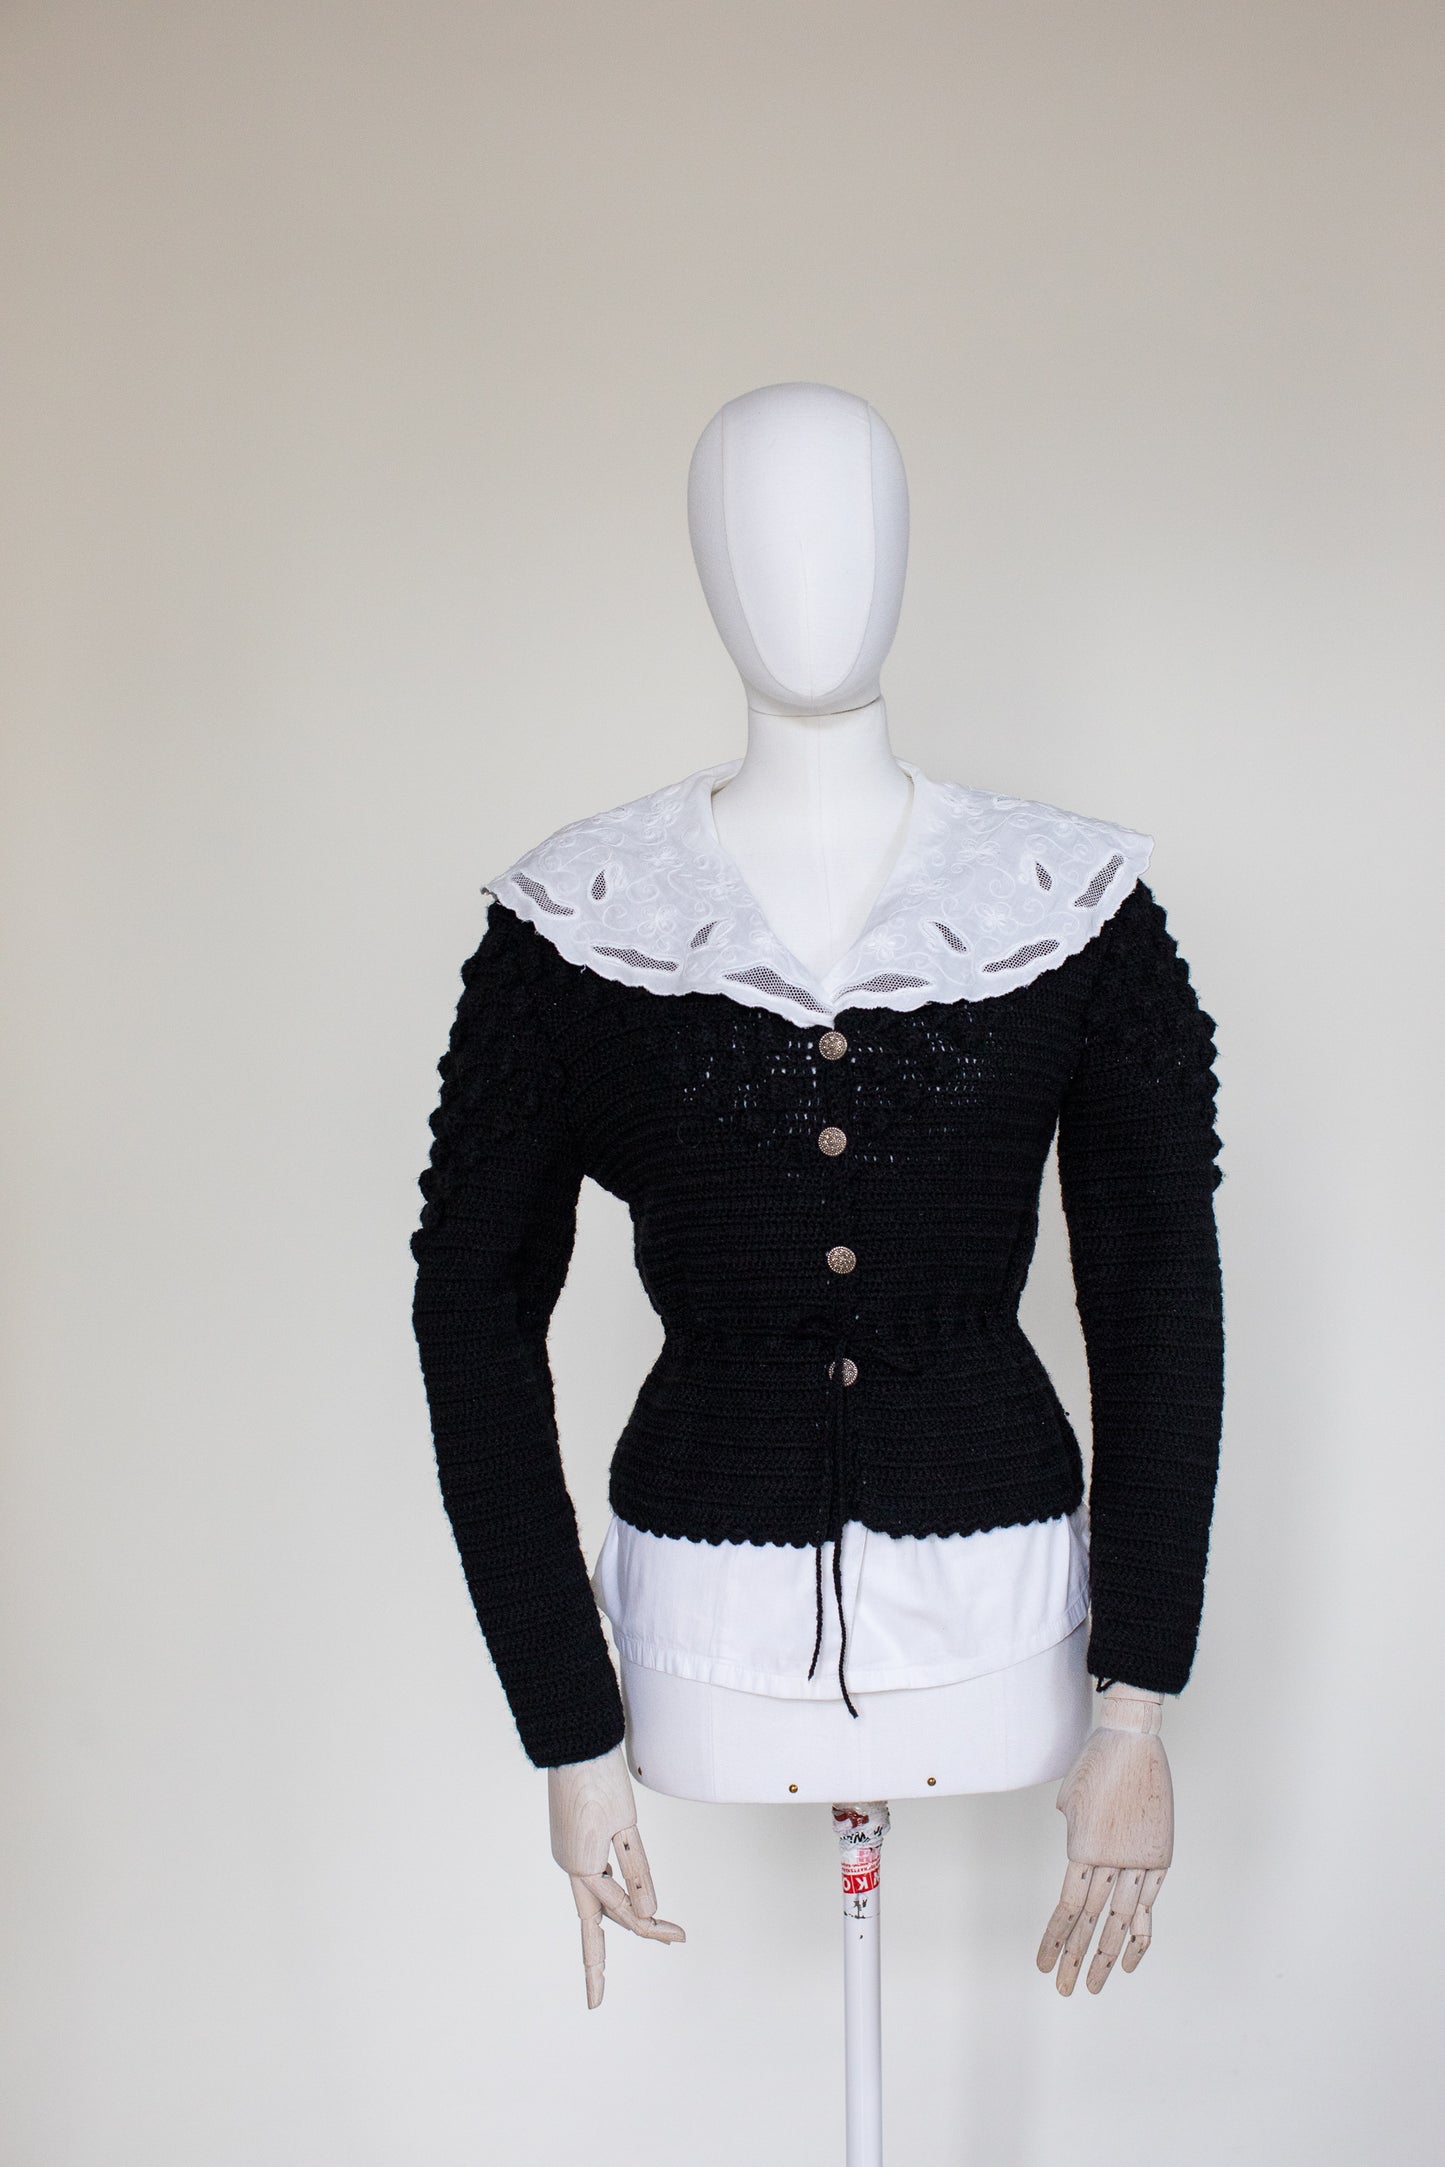 Vintage Black Hand Knitted Austrian Cardigan with 3D Pom Pom Embroidery Size XS-S